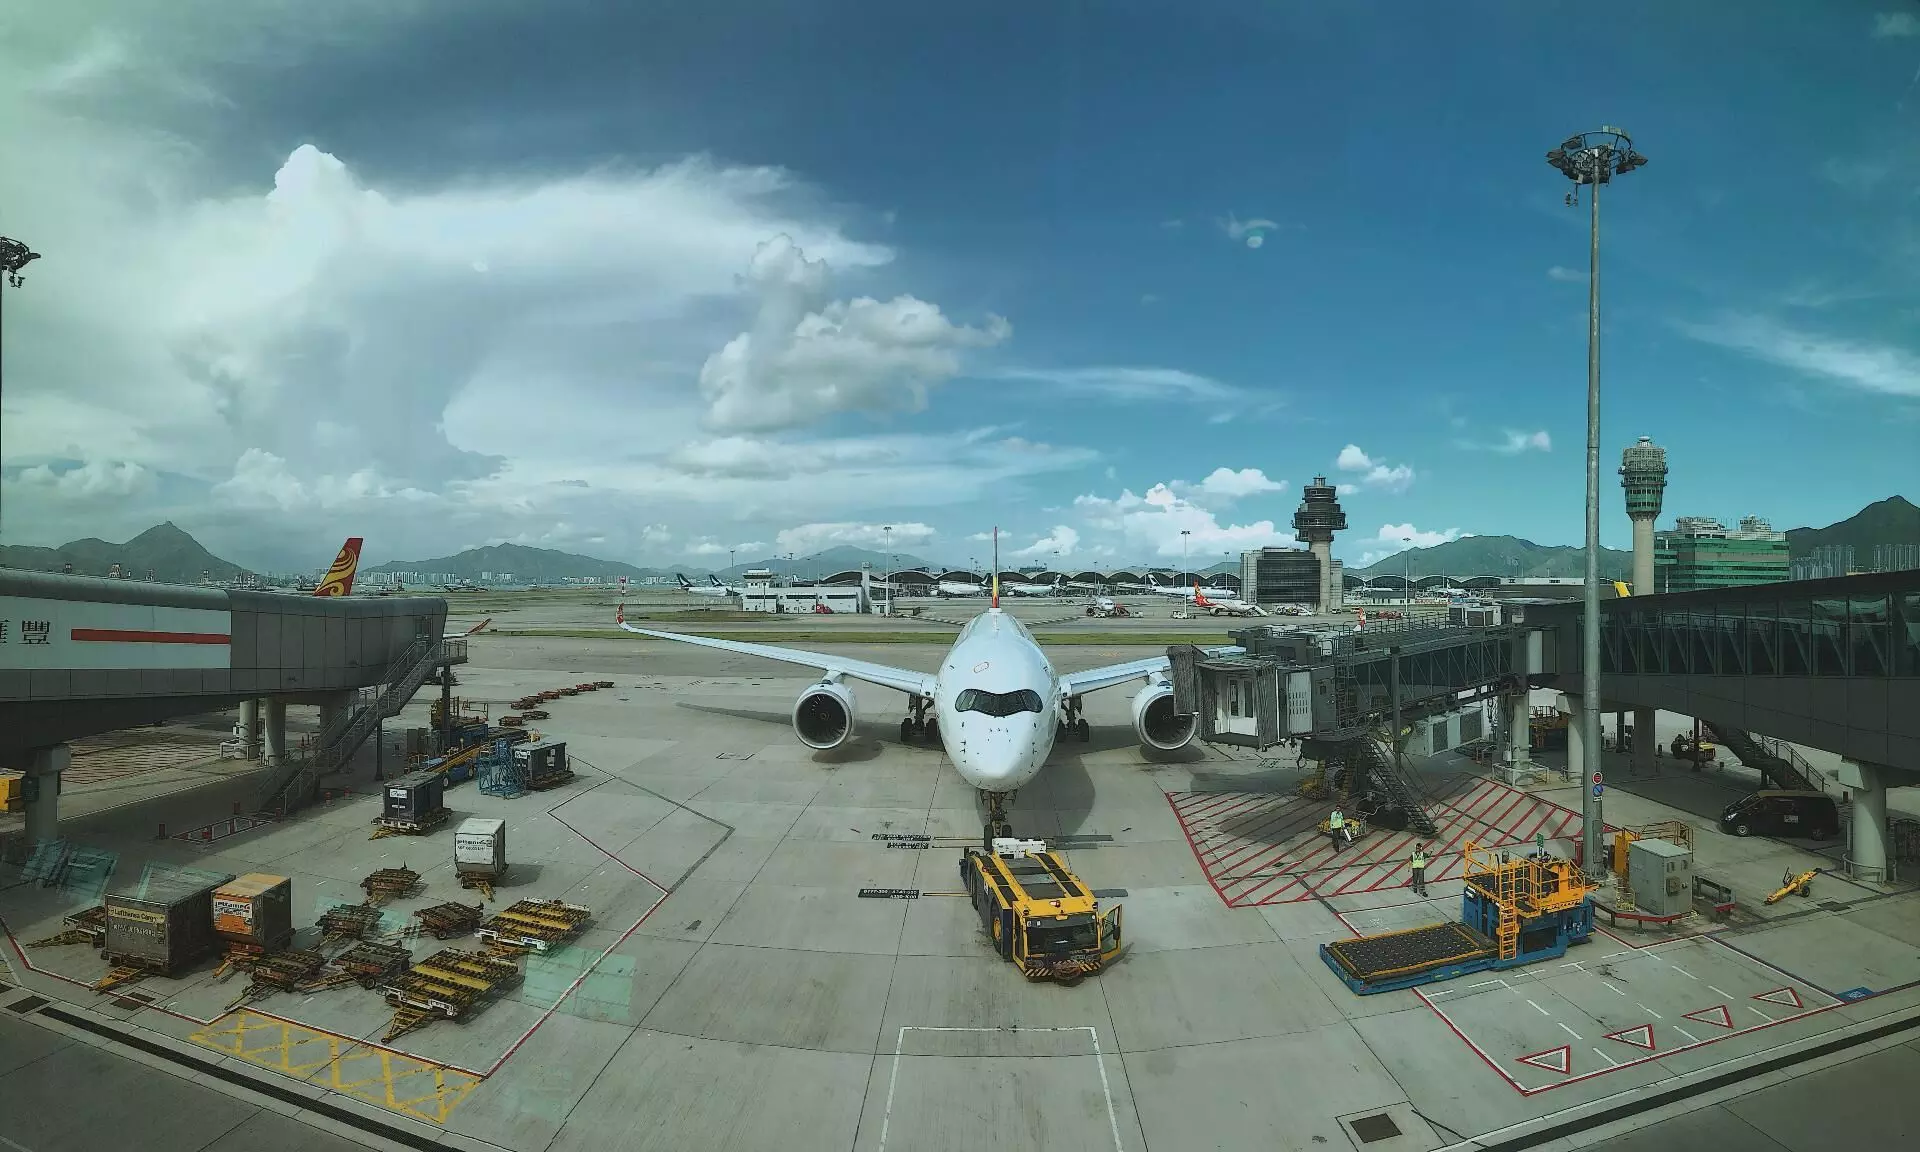 Hong Kong remains busiest cargo airport, CVG records highest increase